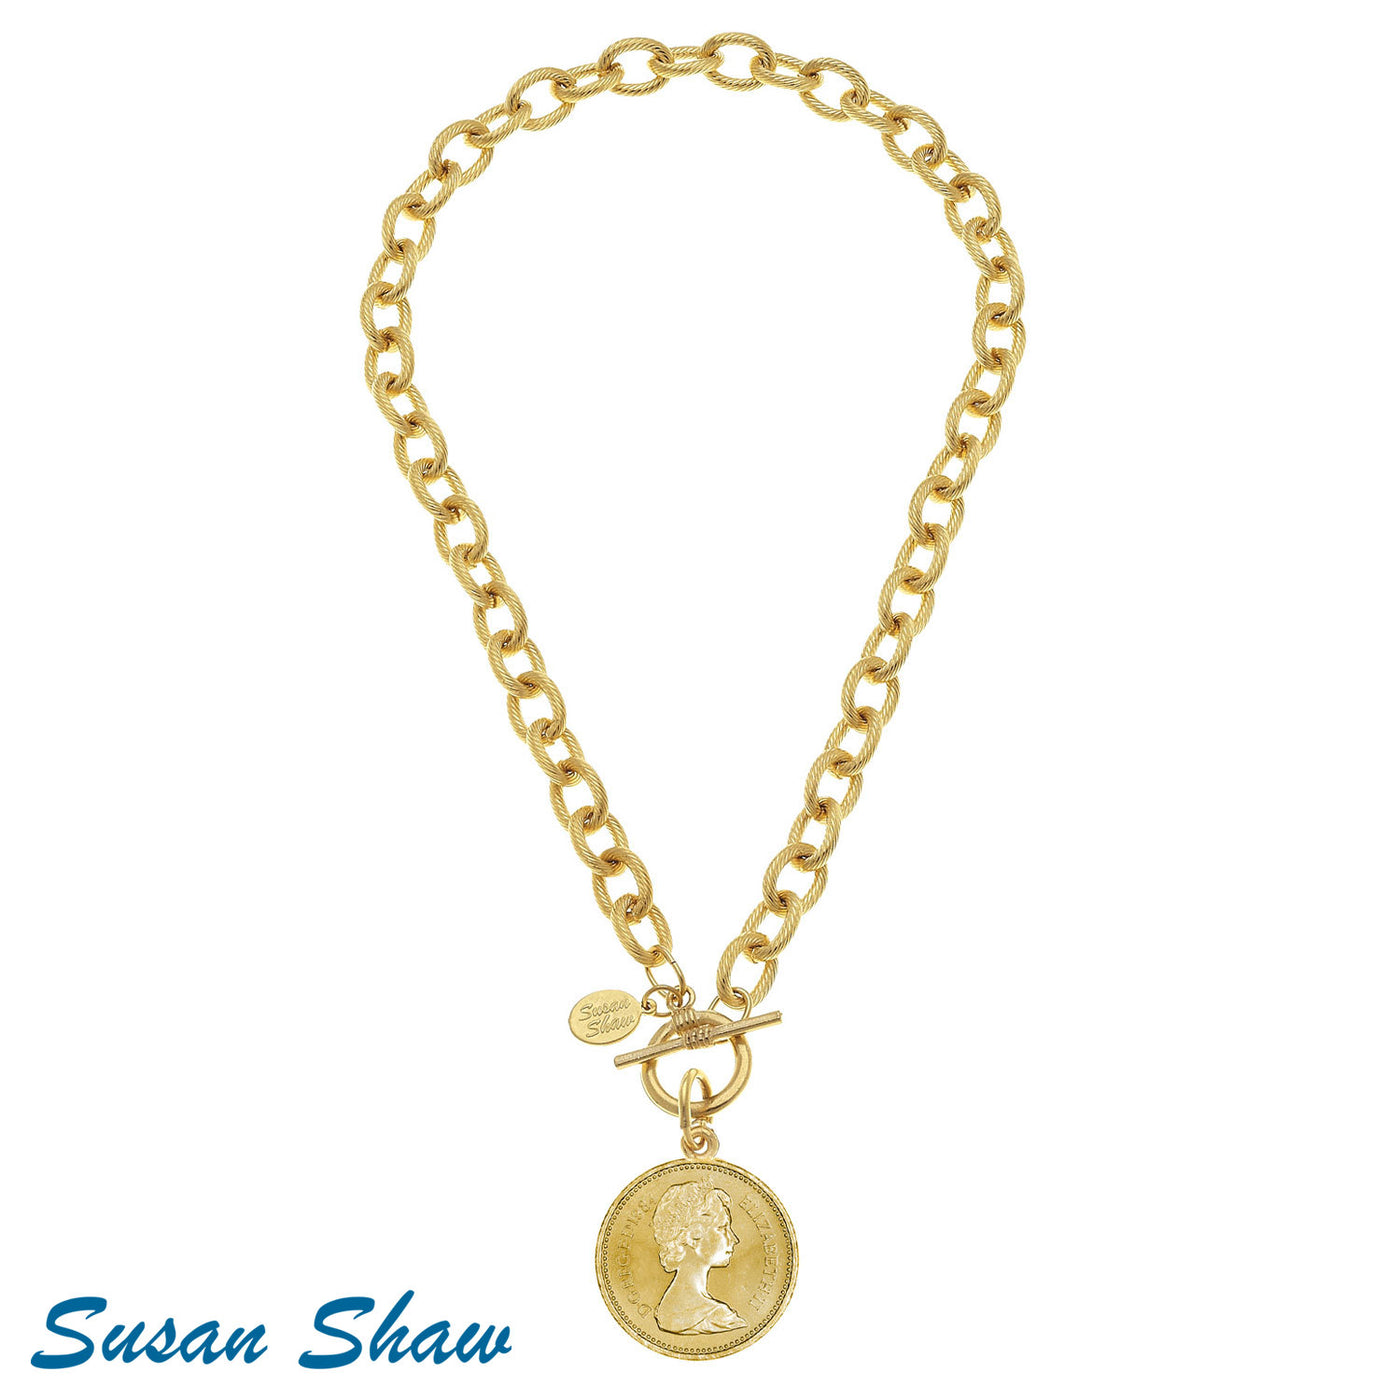 Queen Coin Toggle Necklace